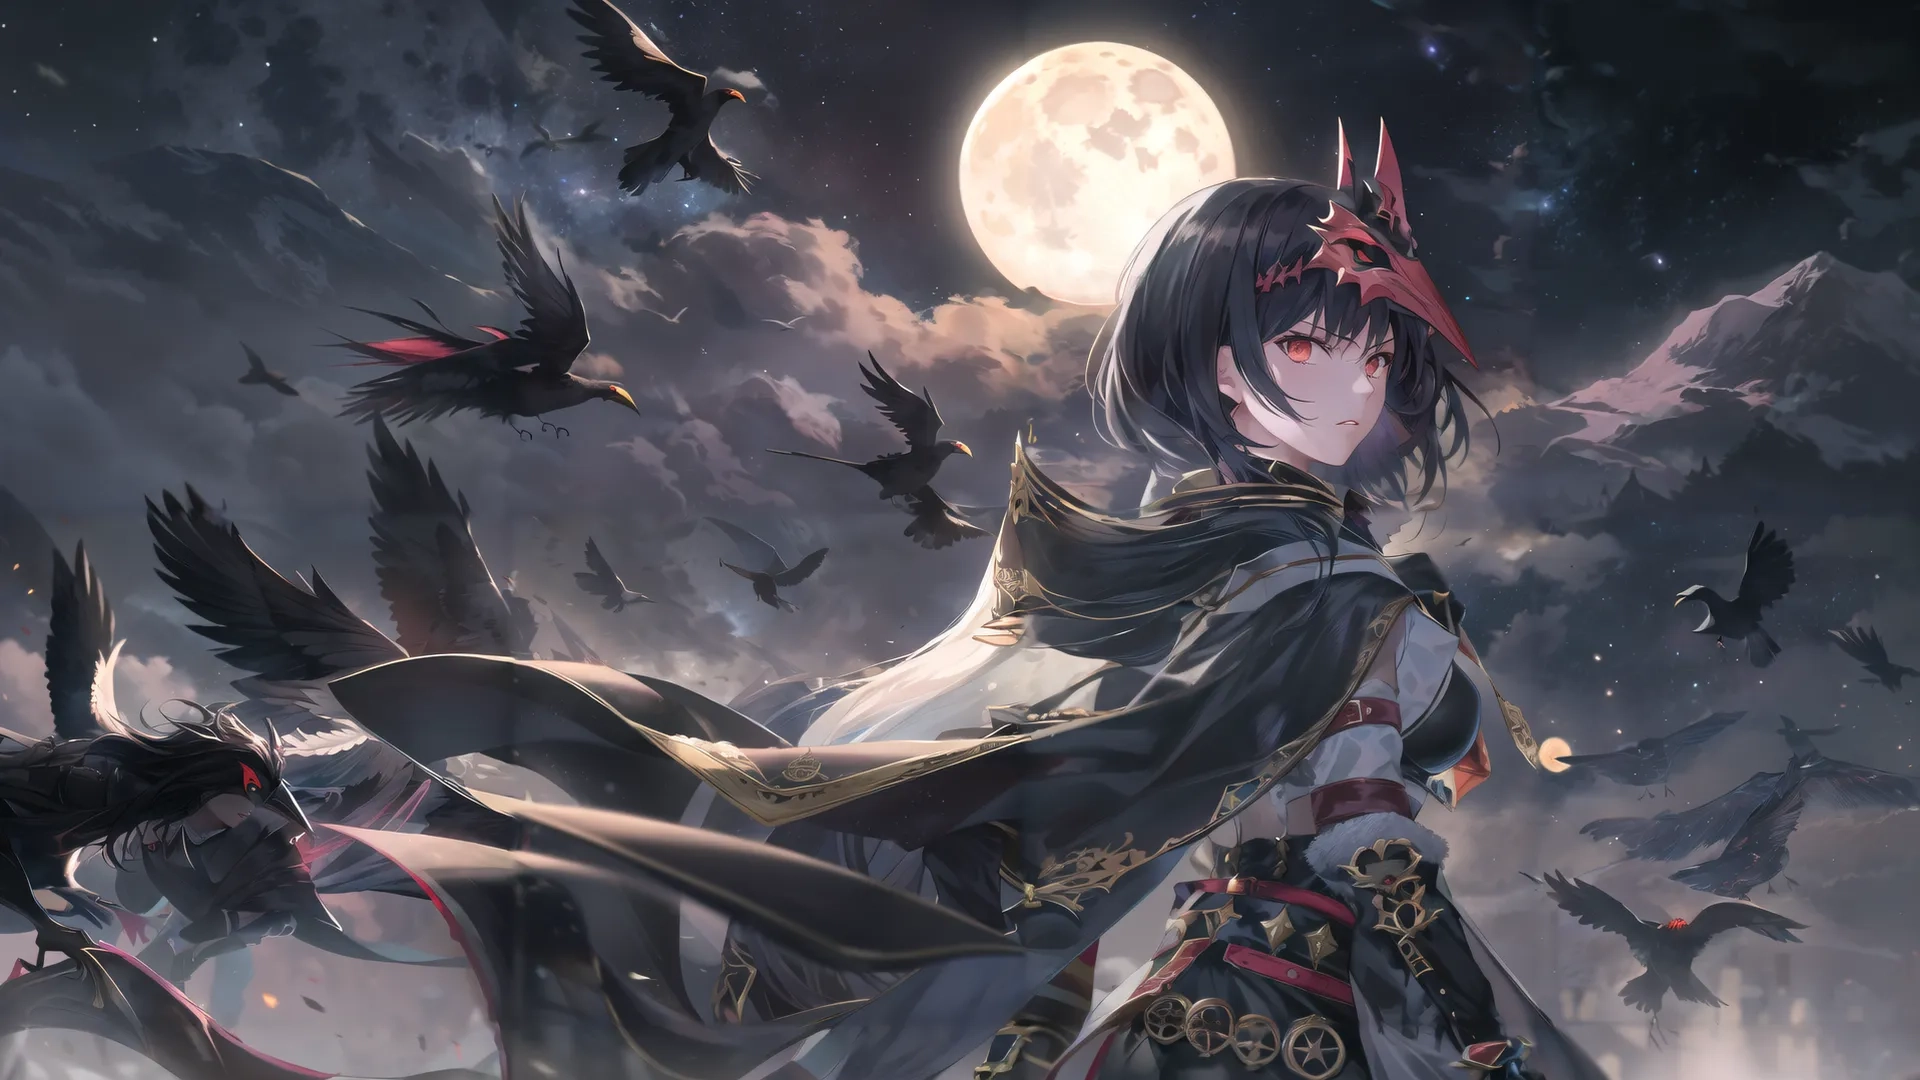 the anime character has horns on his head and black eyes as the raven flies around her and there is one person on her knee and there are pigeons scattered around
